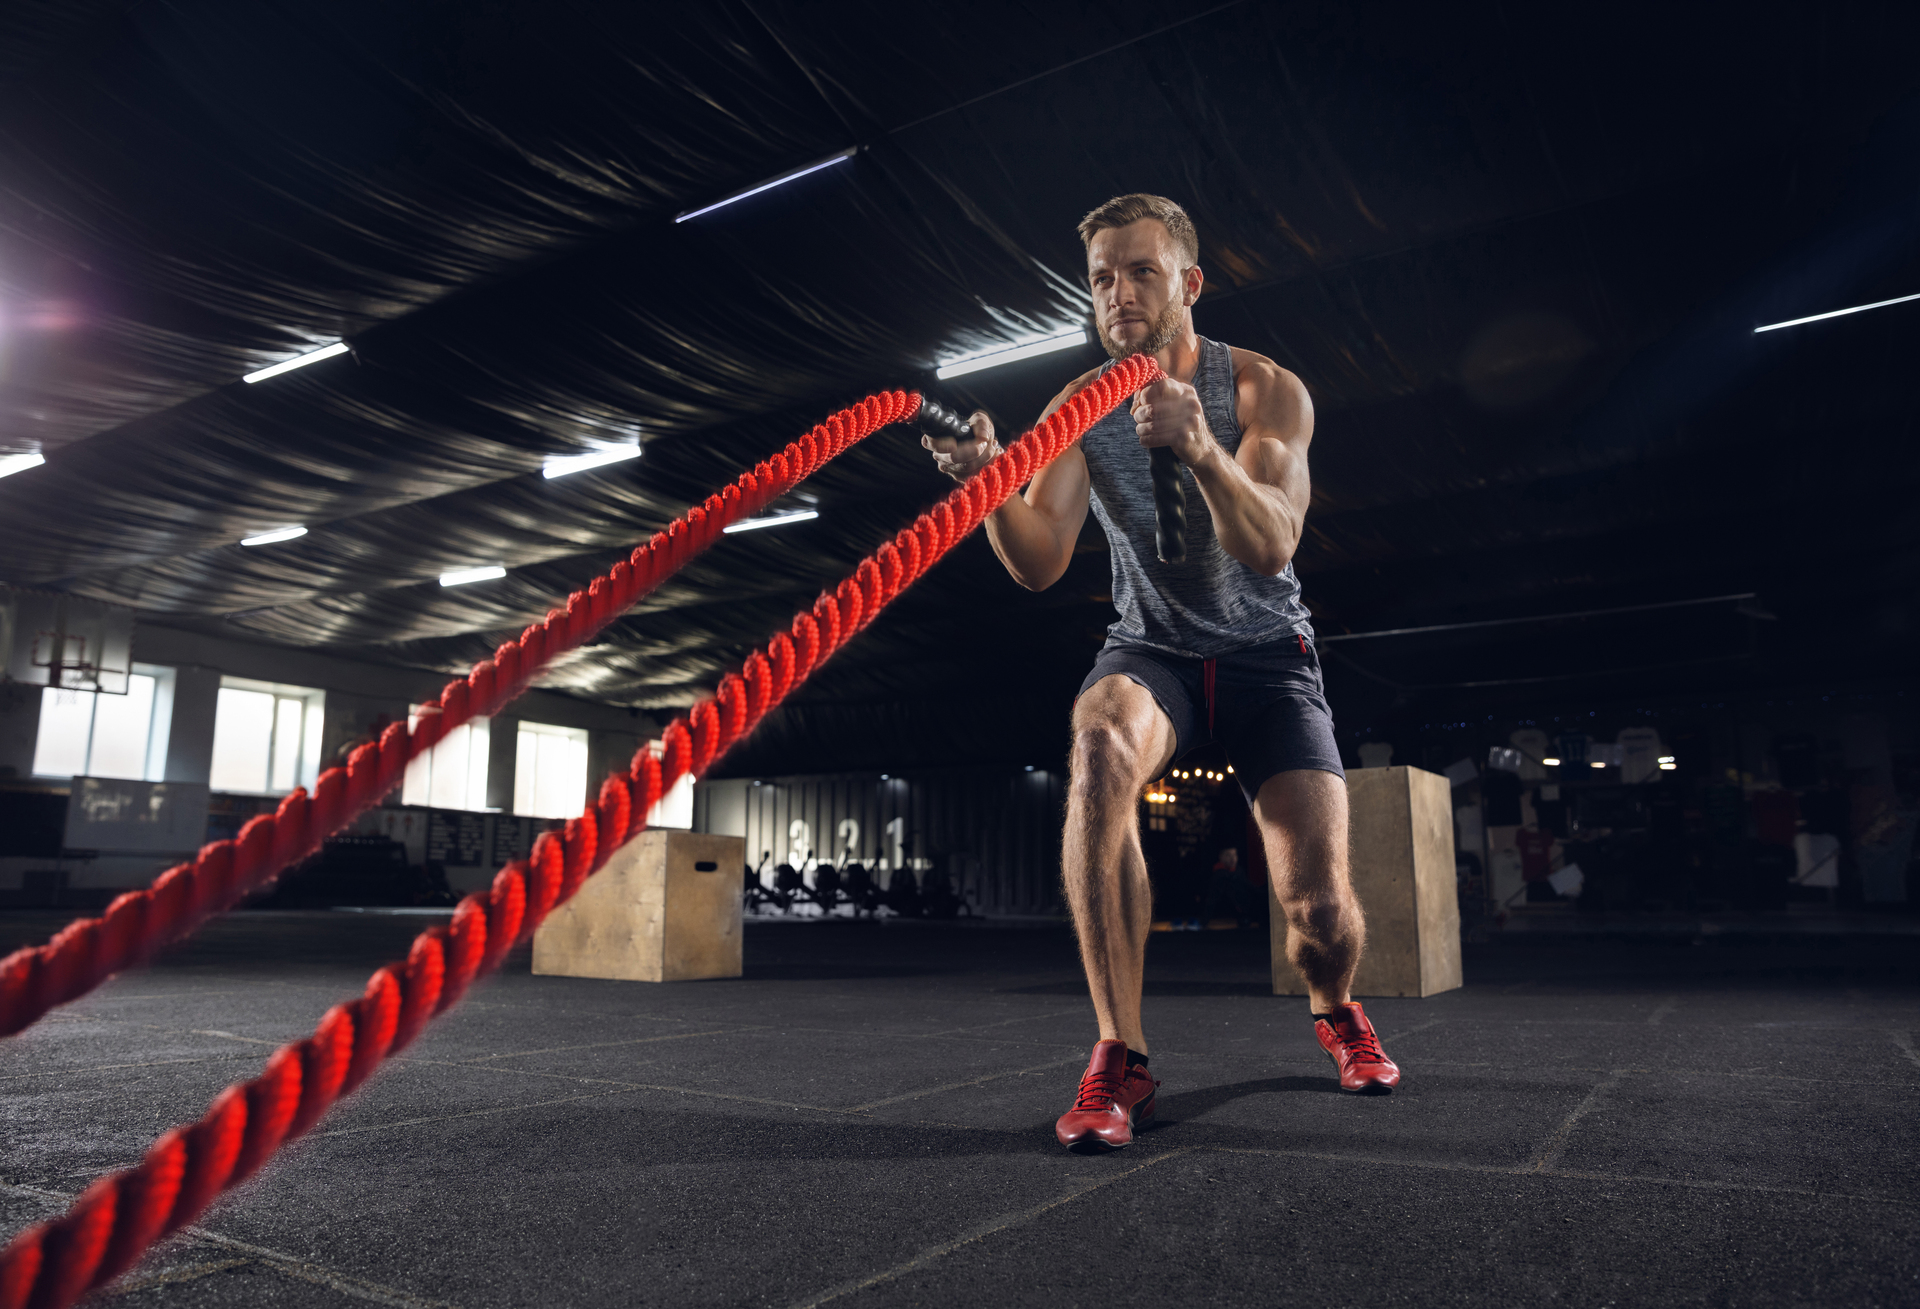 Young healthy man, athlete doing exercise with the ropes in gym. Single male model practicing hard and training his upper body. Concept of healthy lifestyle, sport, fitness, bodybuilding, wellbeing.